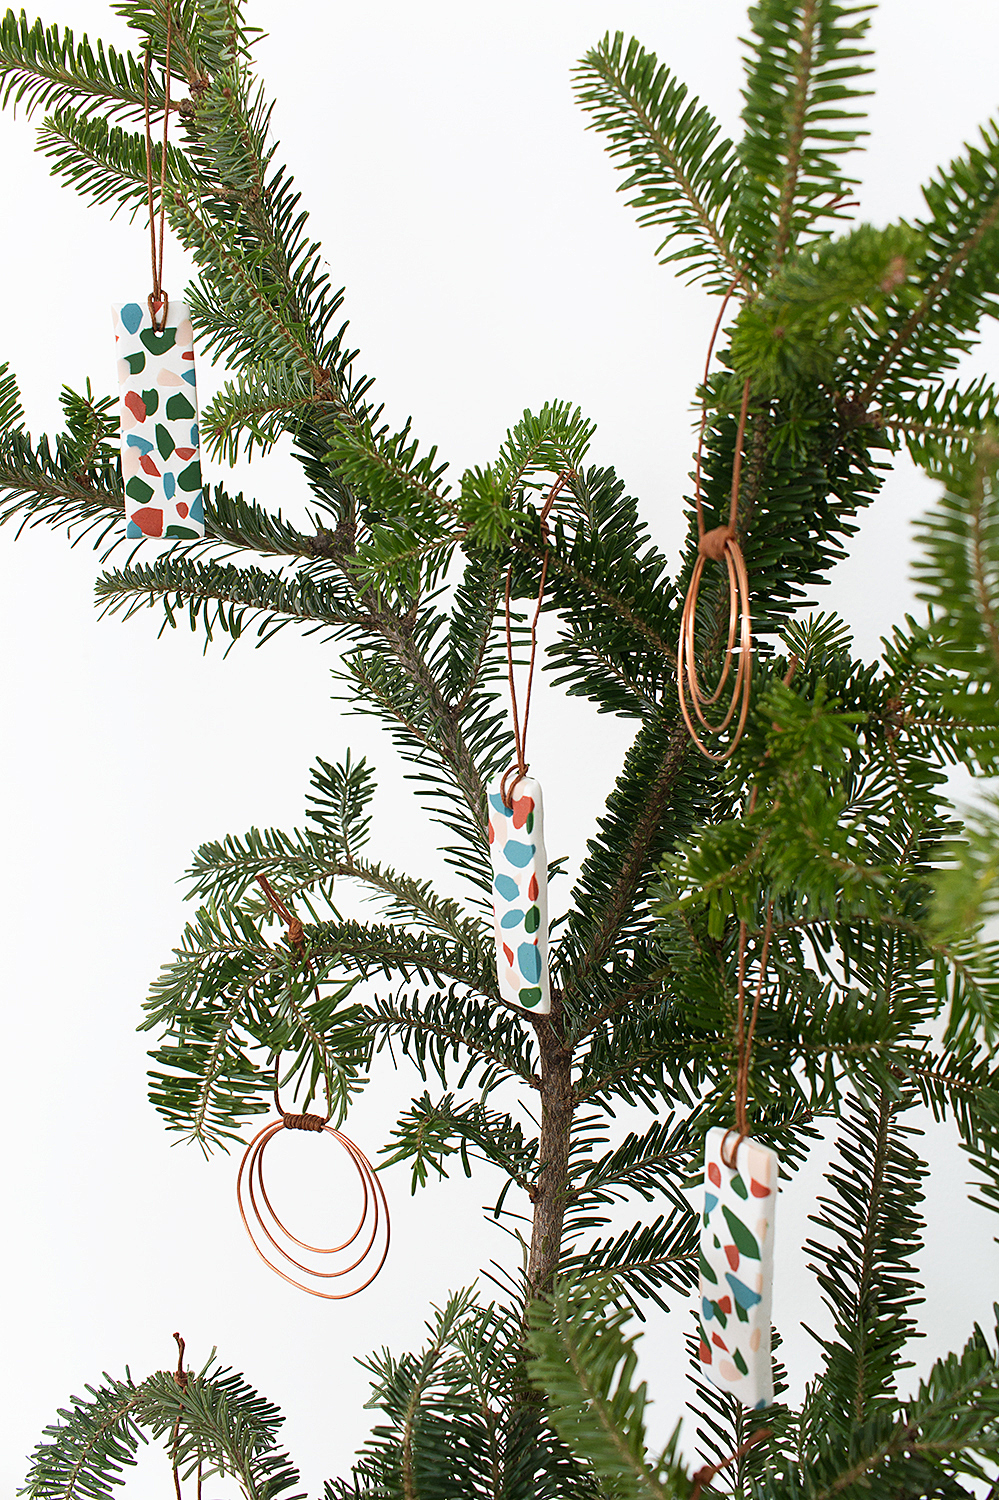 Add a little boho bling to your holiday decor with these easy DIY Copper Wire Hoop Ornaments that take just ten minutes to make!